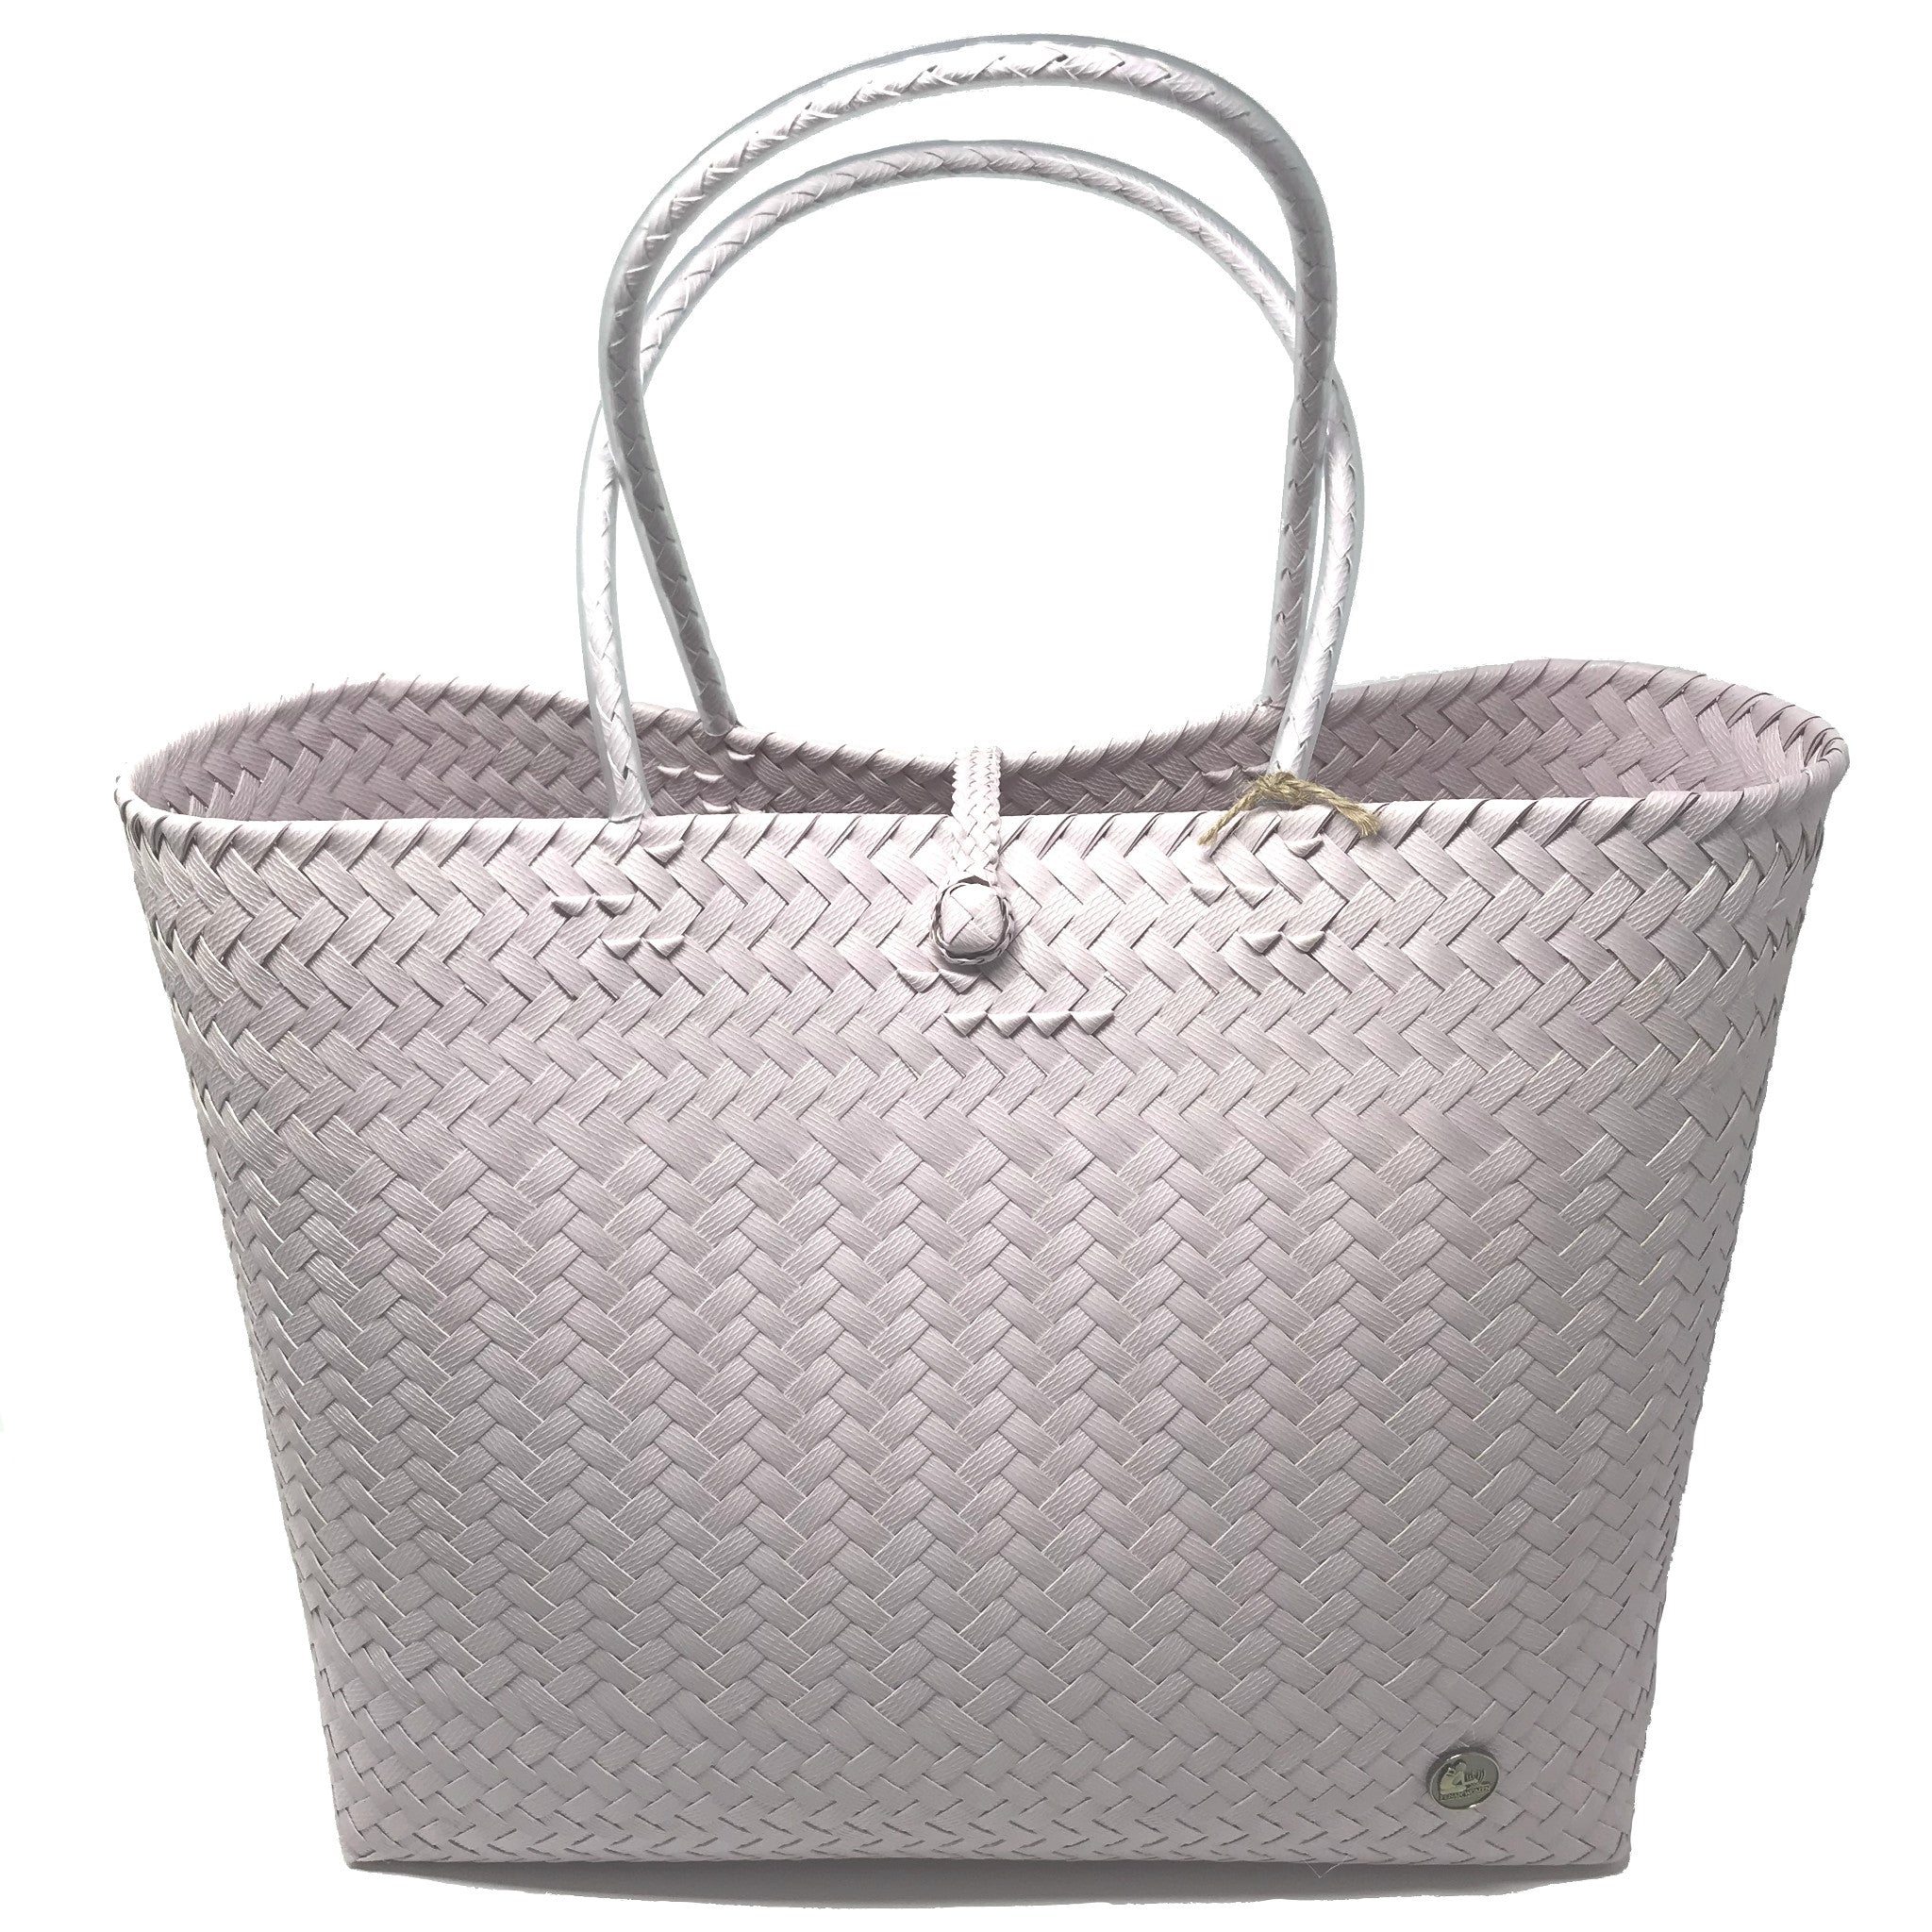 Lilac large size tote bag facing the front.